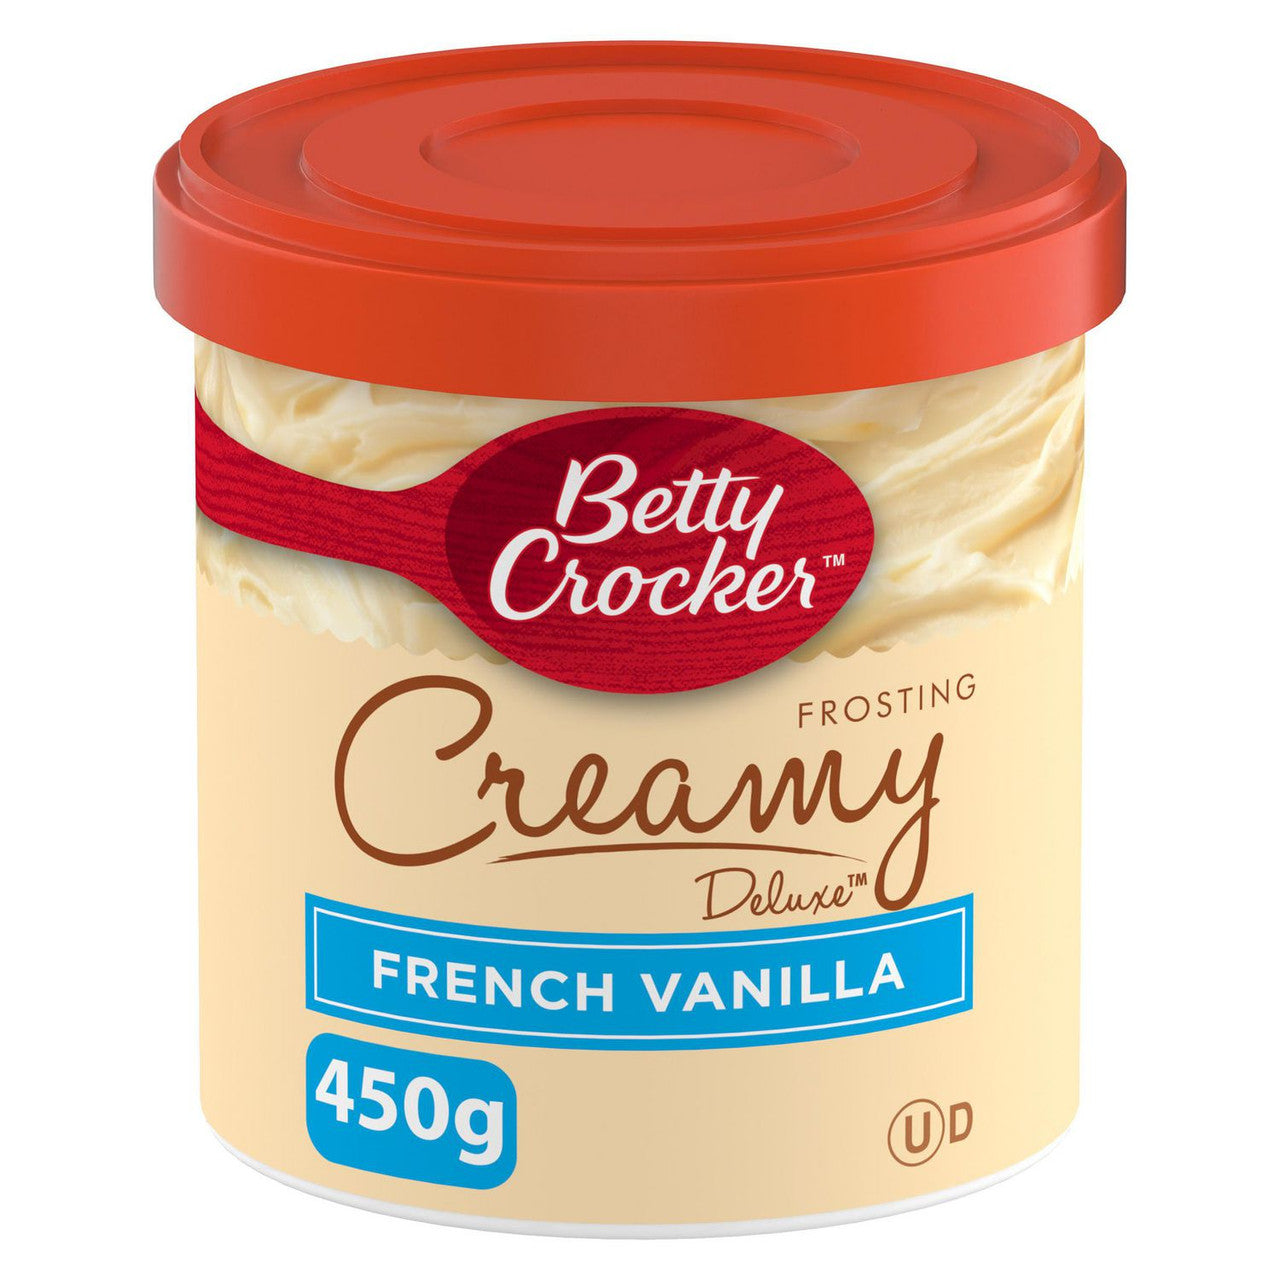 Betty Crocker Gluten Free Creamy Deluxe French Vanilla Frosting, 450g/15.75 oz. Jar {Imported from Canada}